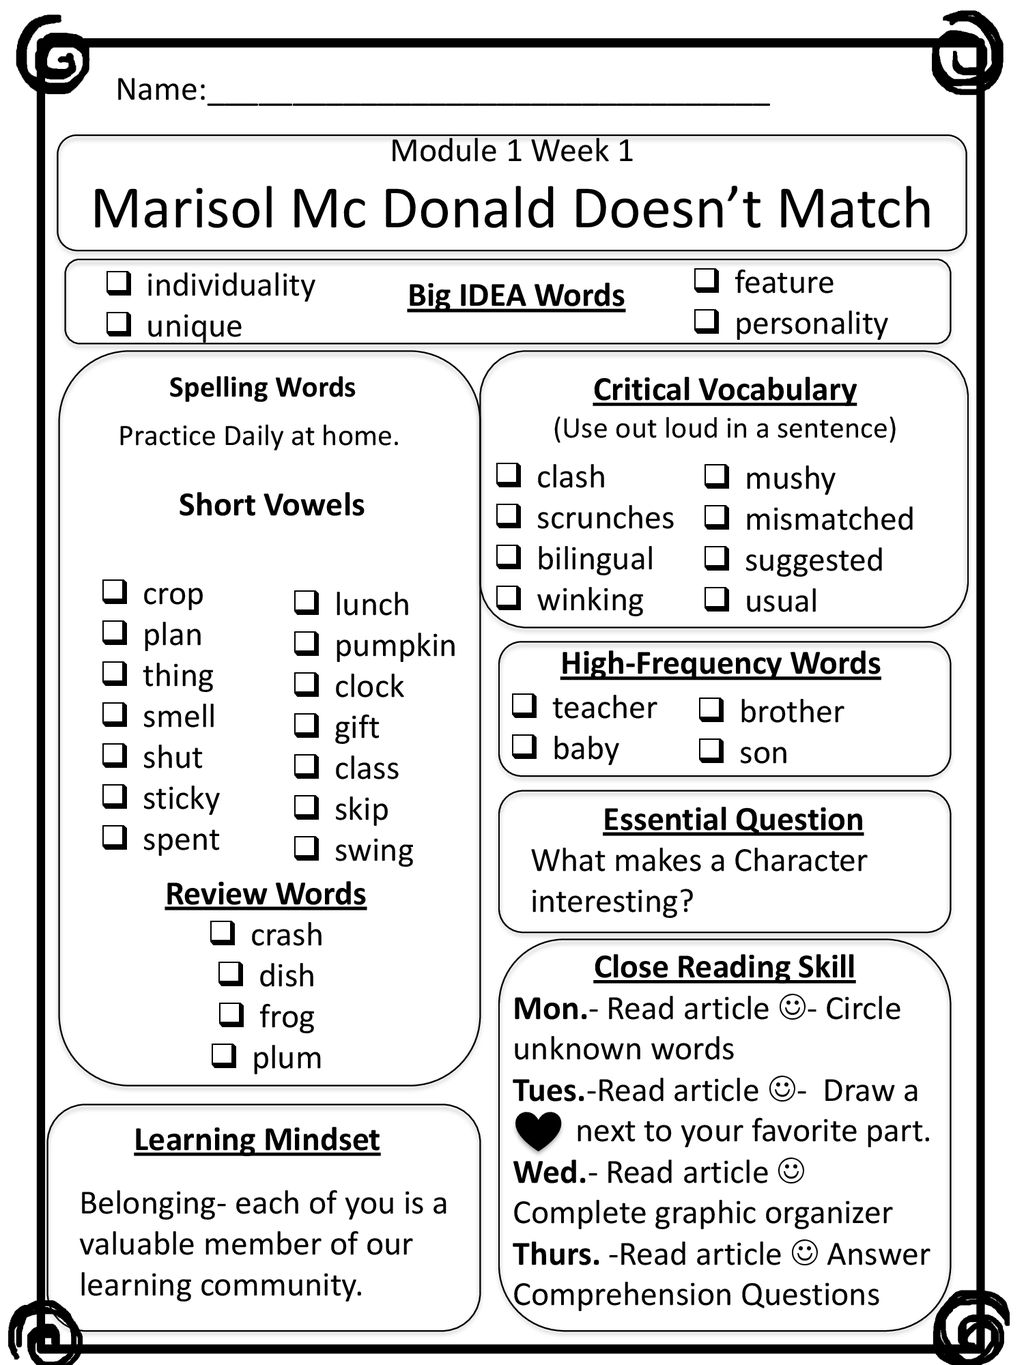 Marisol Mc Donald Doesn't Match - Ppt Download